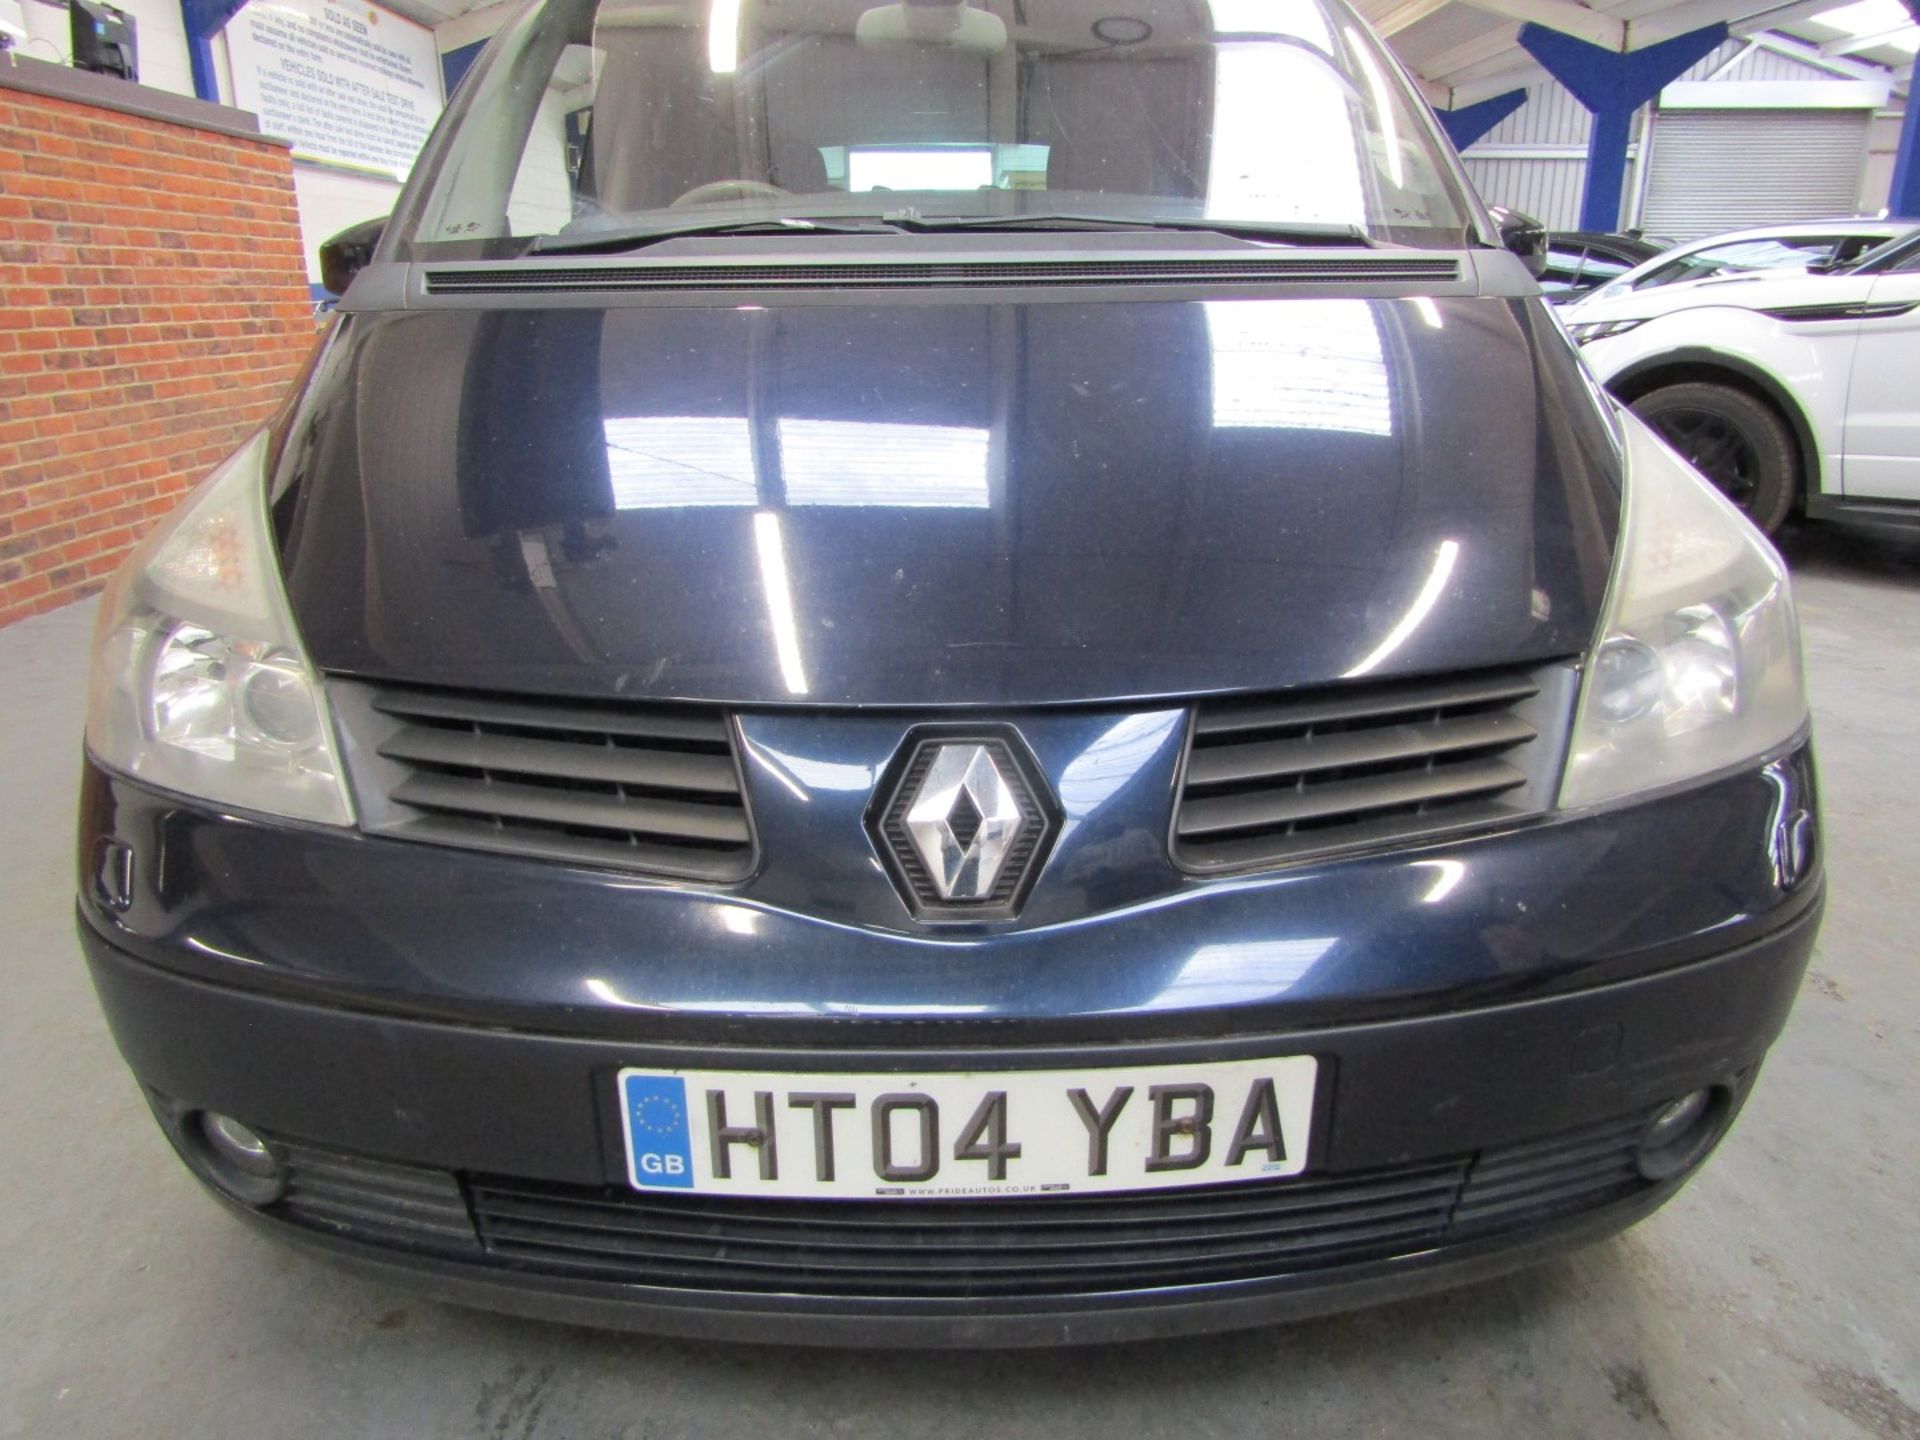 04 04 Renault Espace Initiale V6 - Image 2 of 27